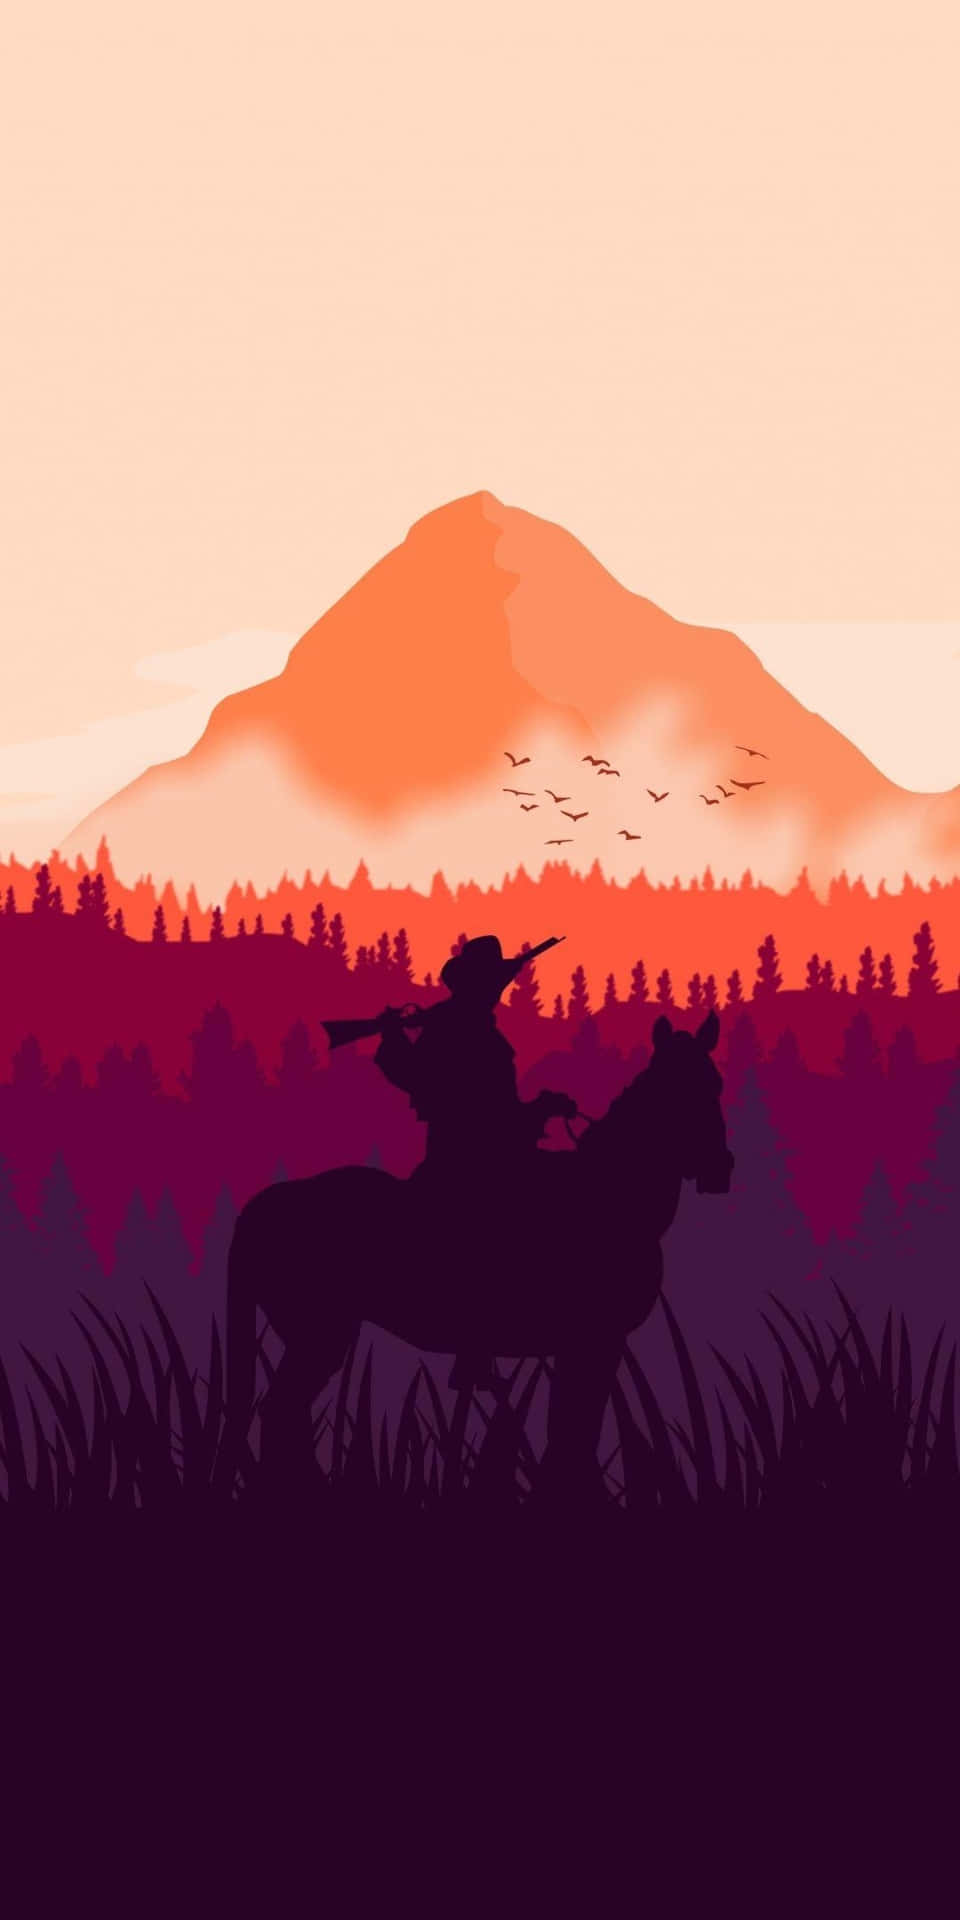 Pixel 3 Red Dead Redemption 2 Background Cowboy's Silhouette With Purple And Orange Tones